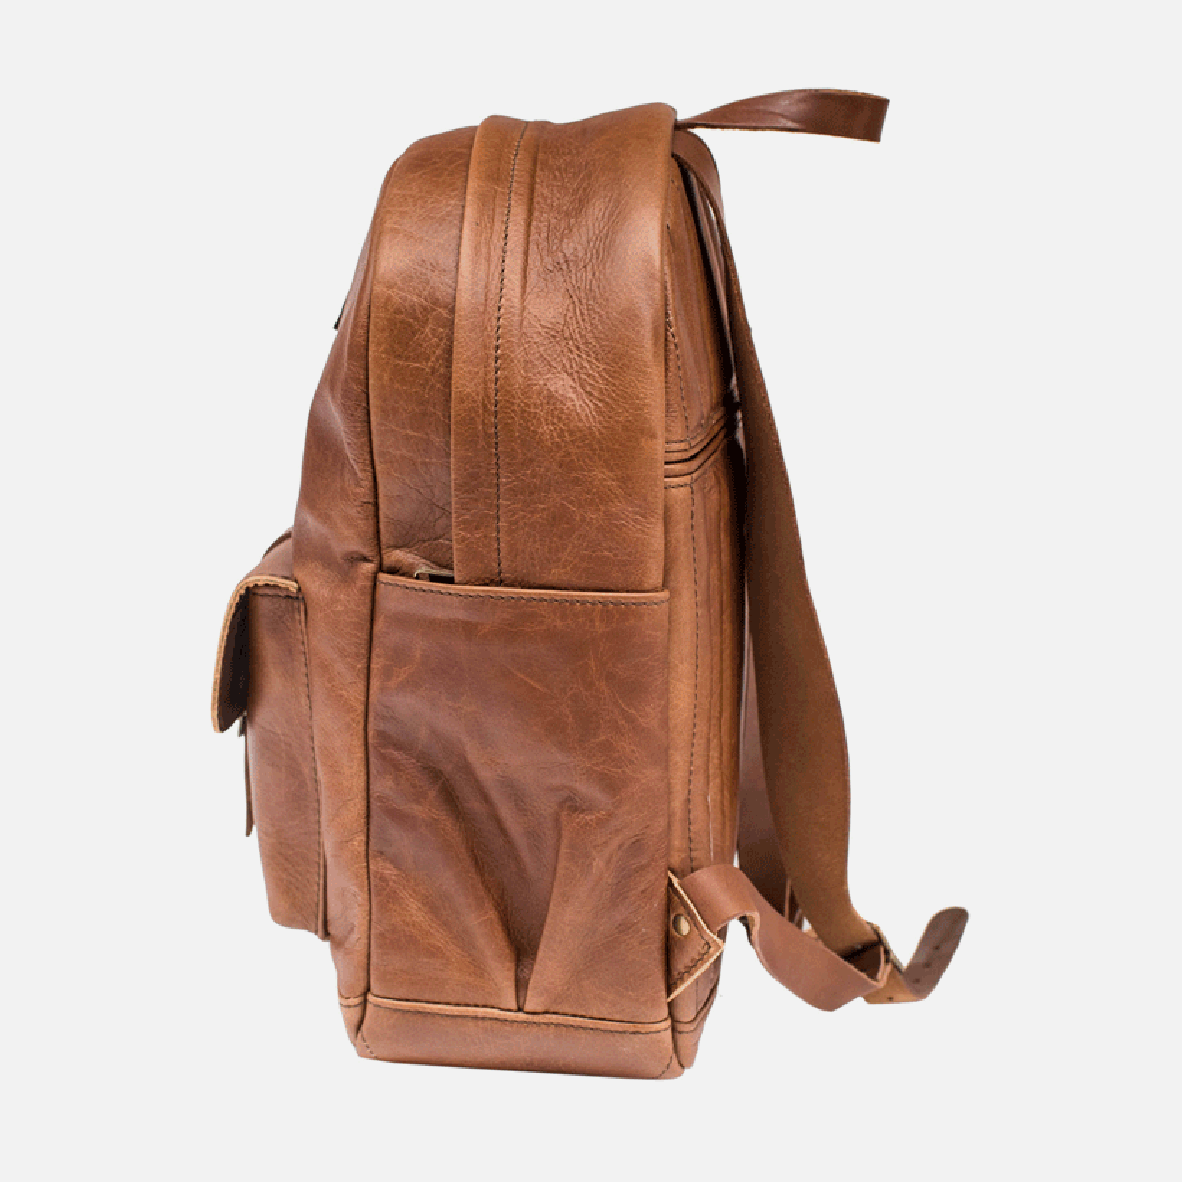 The Froniter Backpack - Tobacco